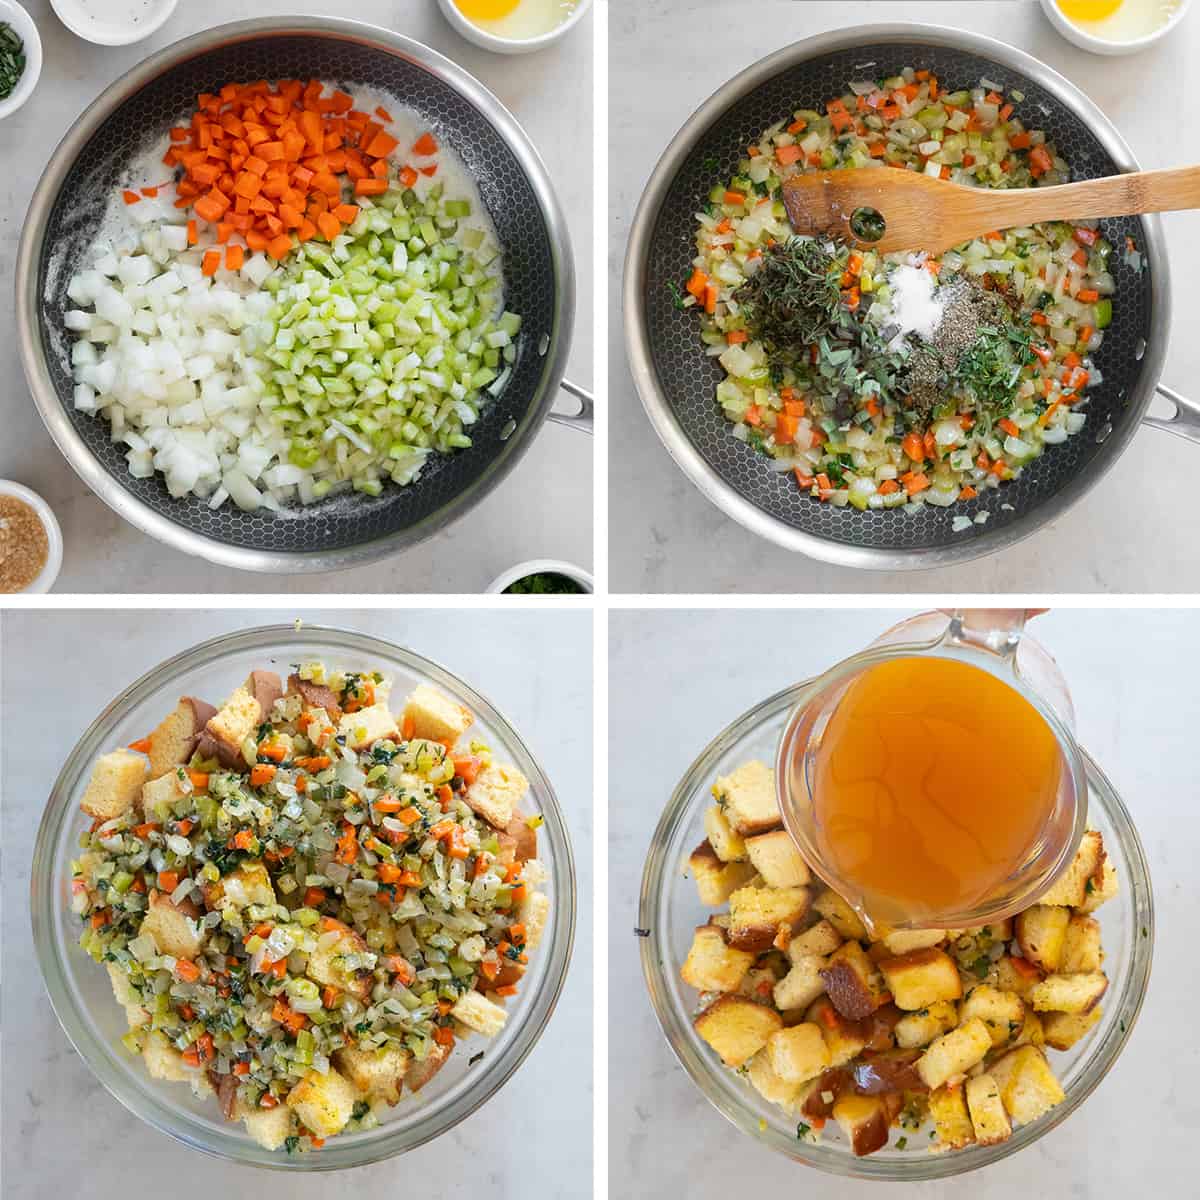 Four images of carrot, onion, and celery cooking in a skillet with herbs then the mixture is added to bread cubes in a bowl with broth.